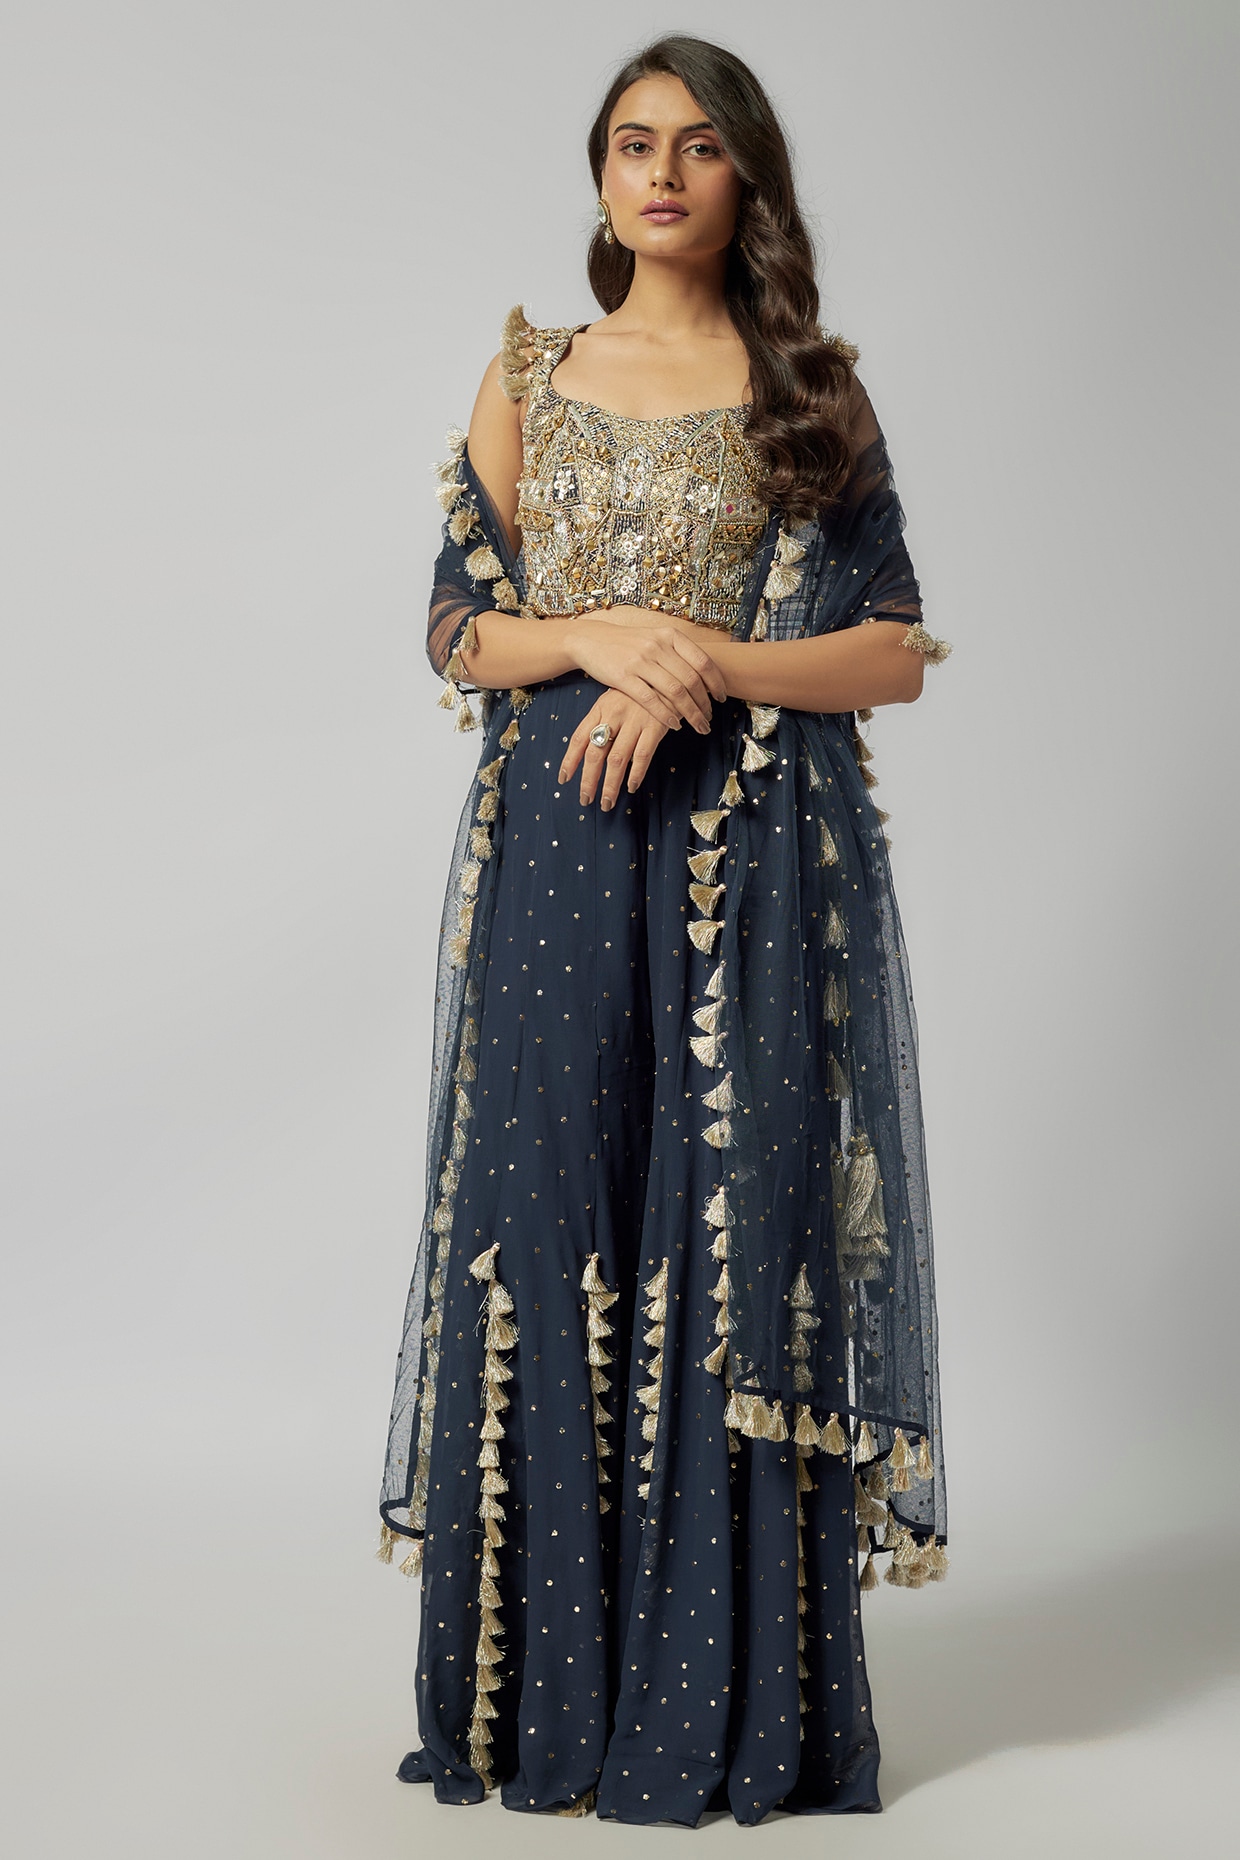 Indian Dresses | Shop Indian Clothes Online | Andaaz Fashion USA